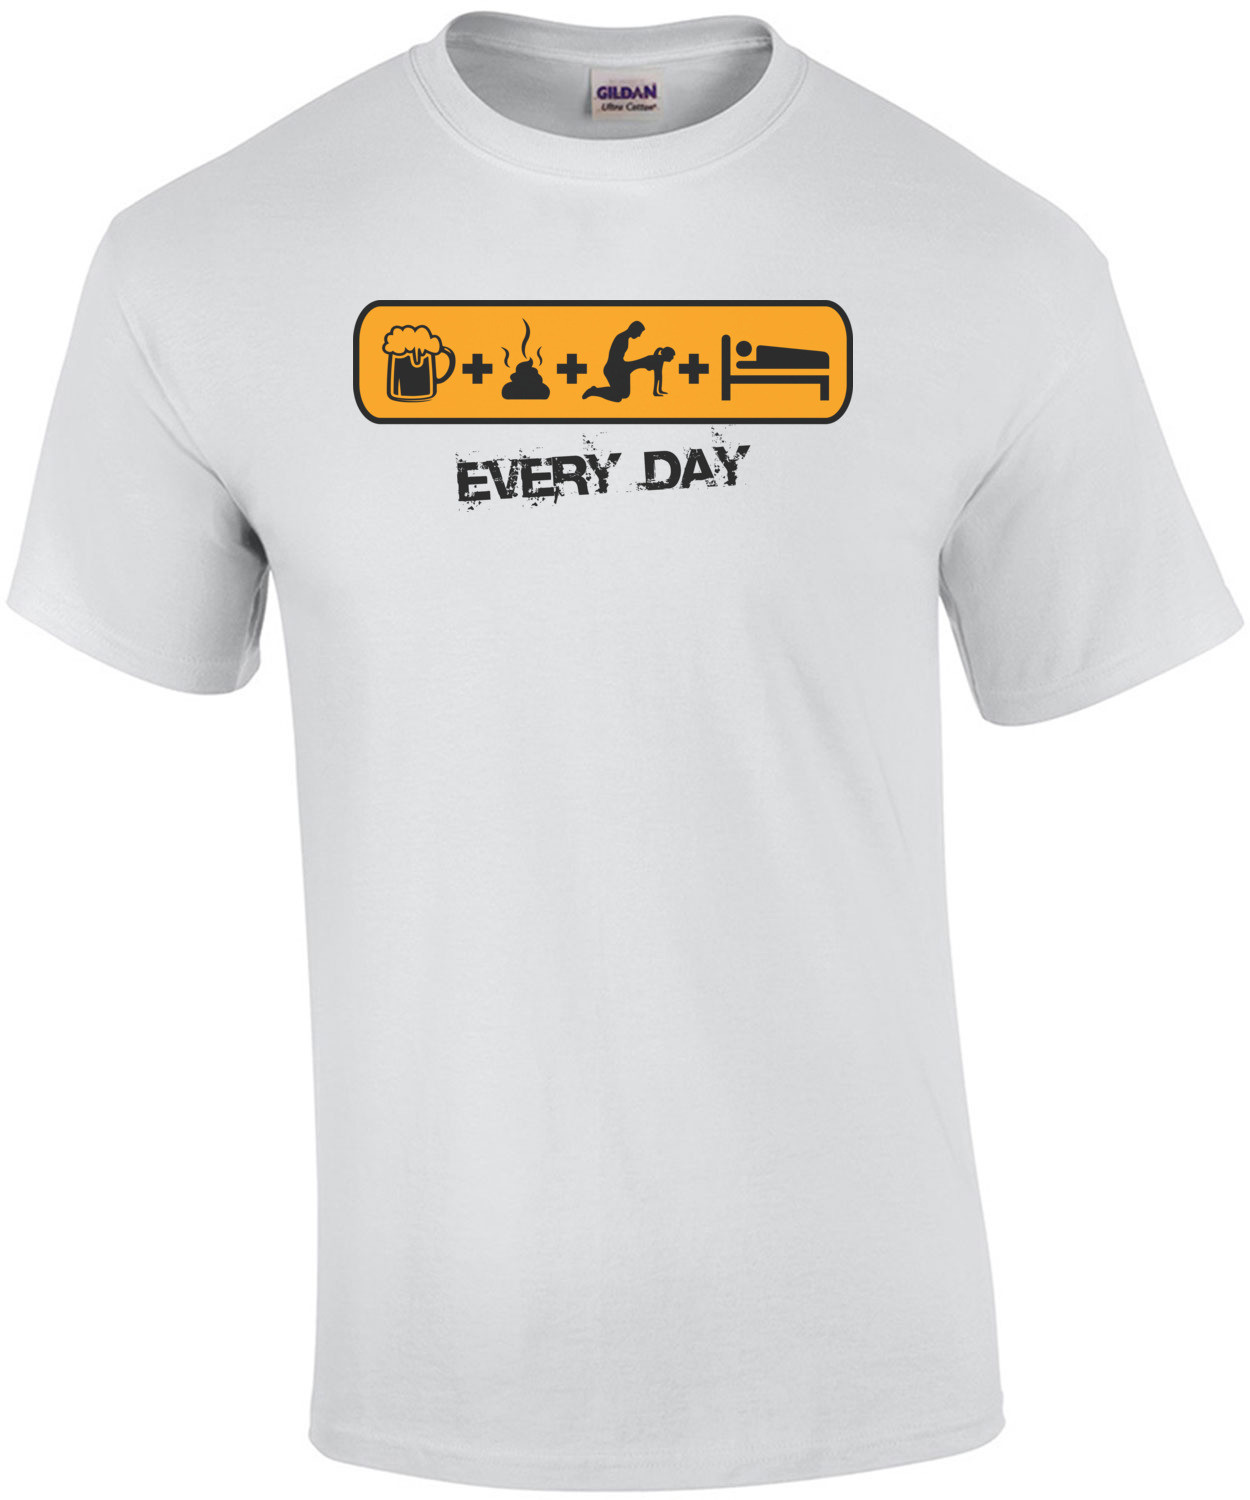 Every Day - Funny T-Shirt